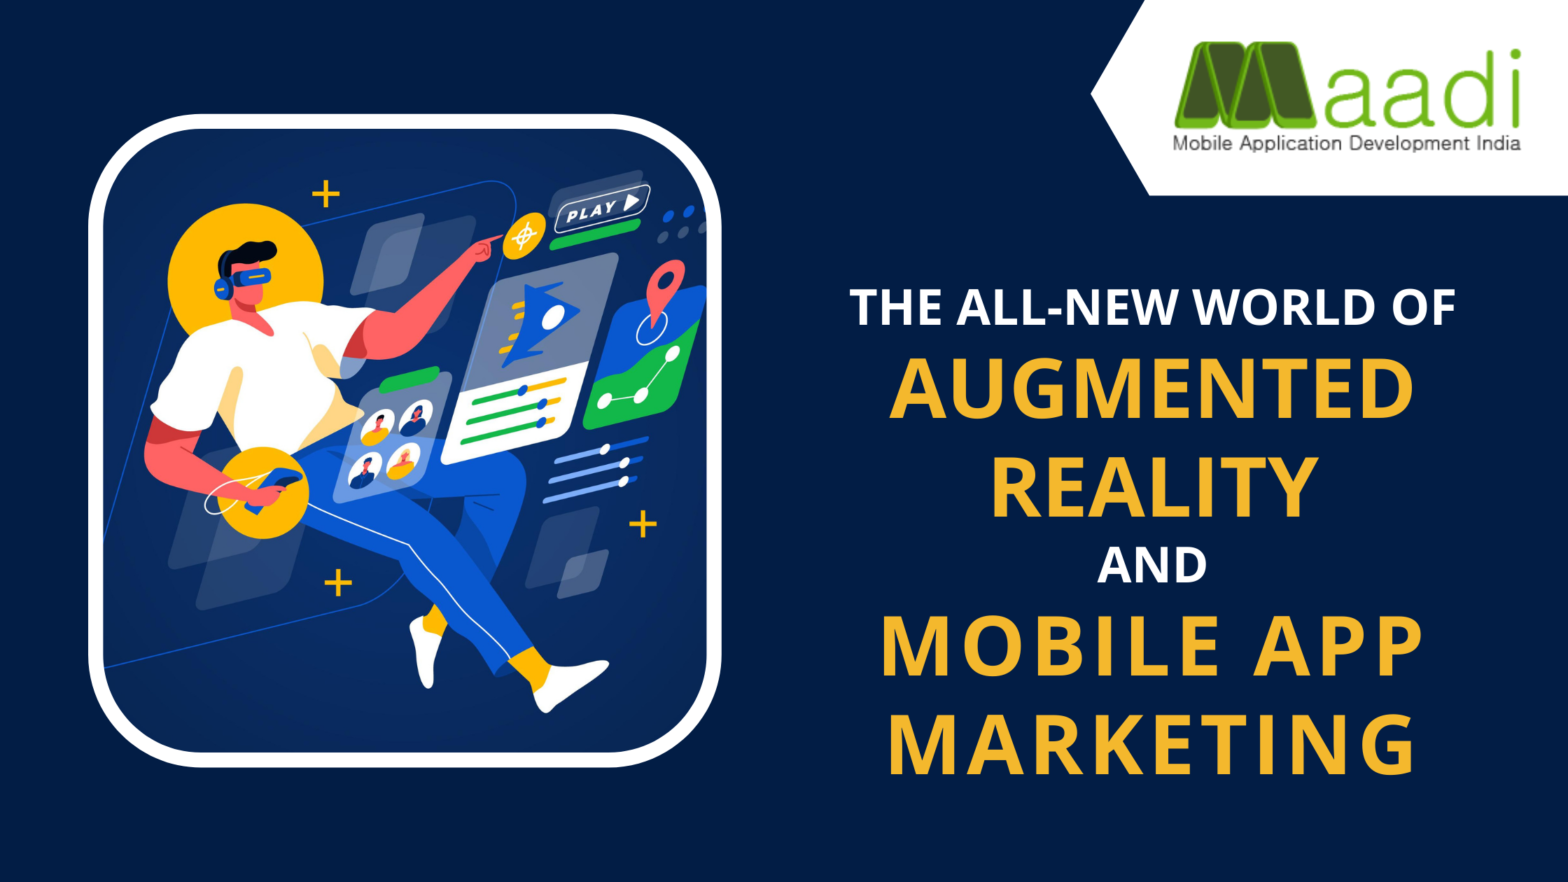 The All-New World of Augmented Reality and Mobile App Marketing